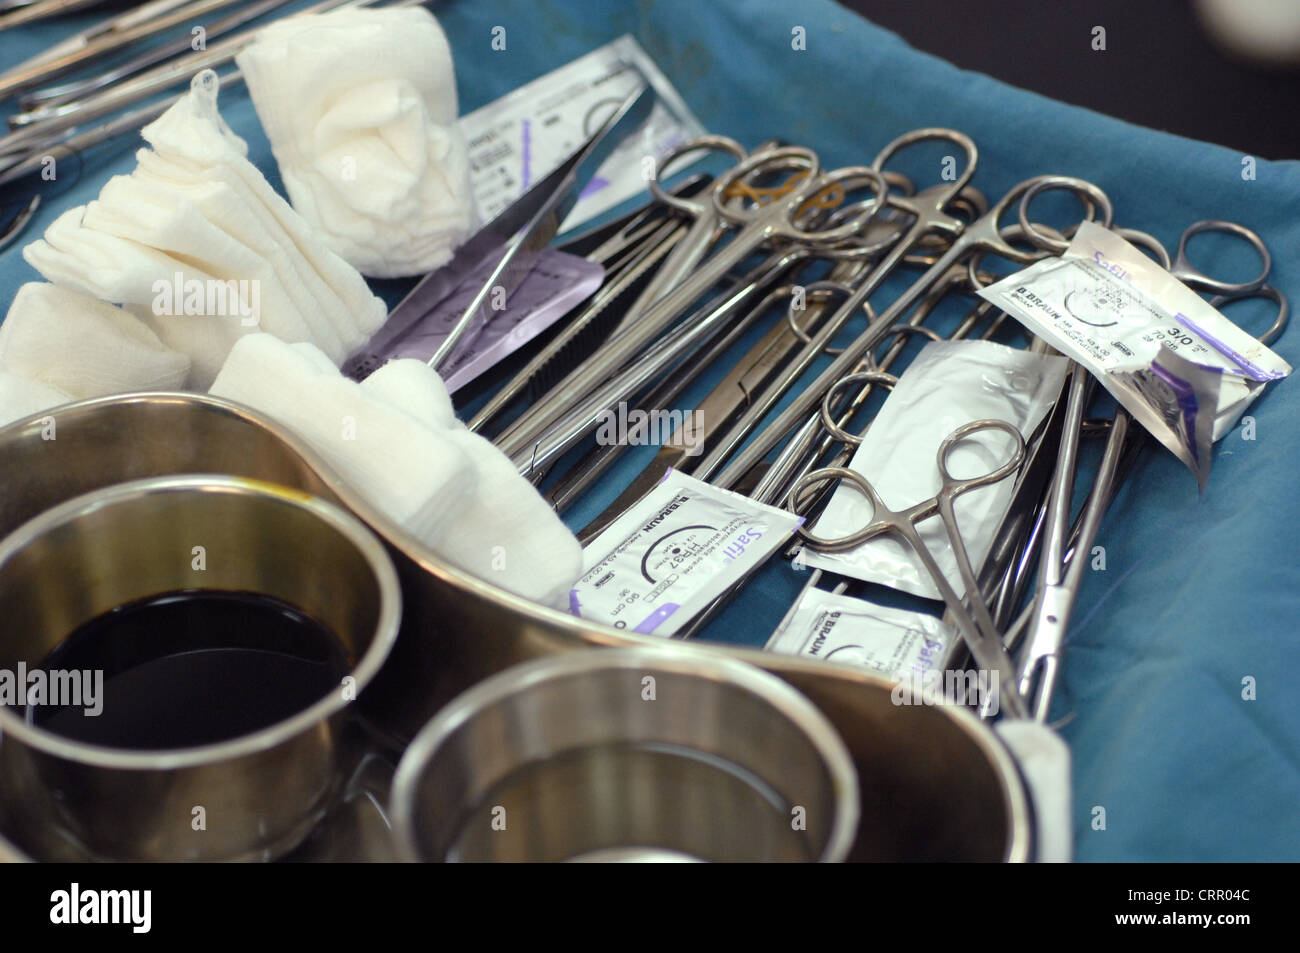 Surgical tools - Sutures, forceps, iodine and spirits sterile gauze Stock Photo